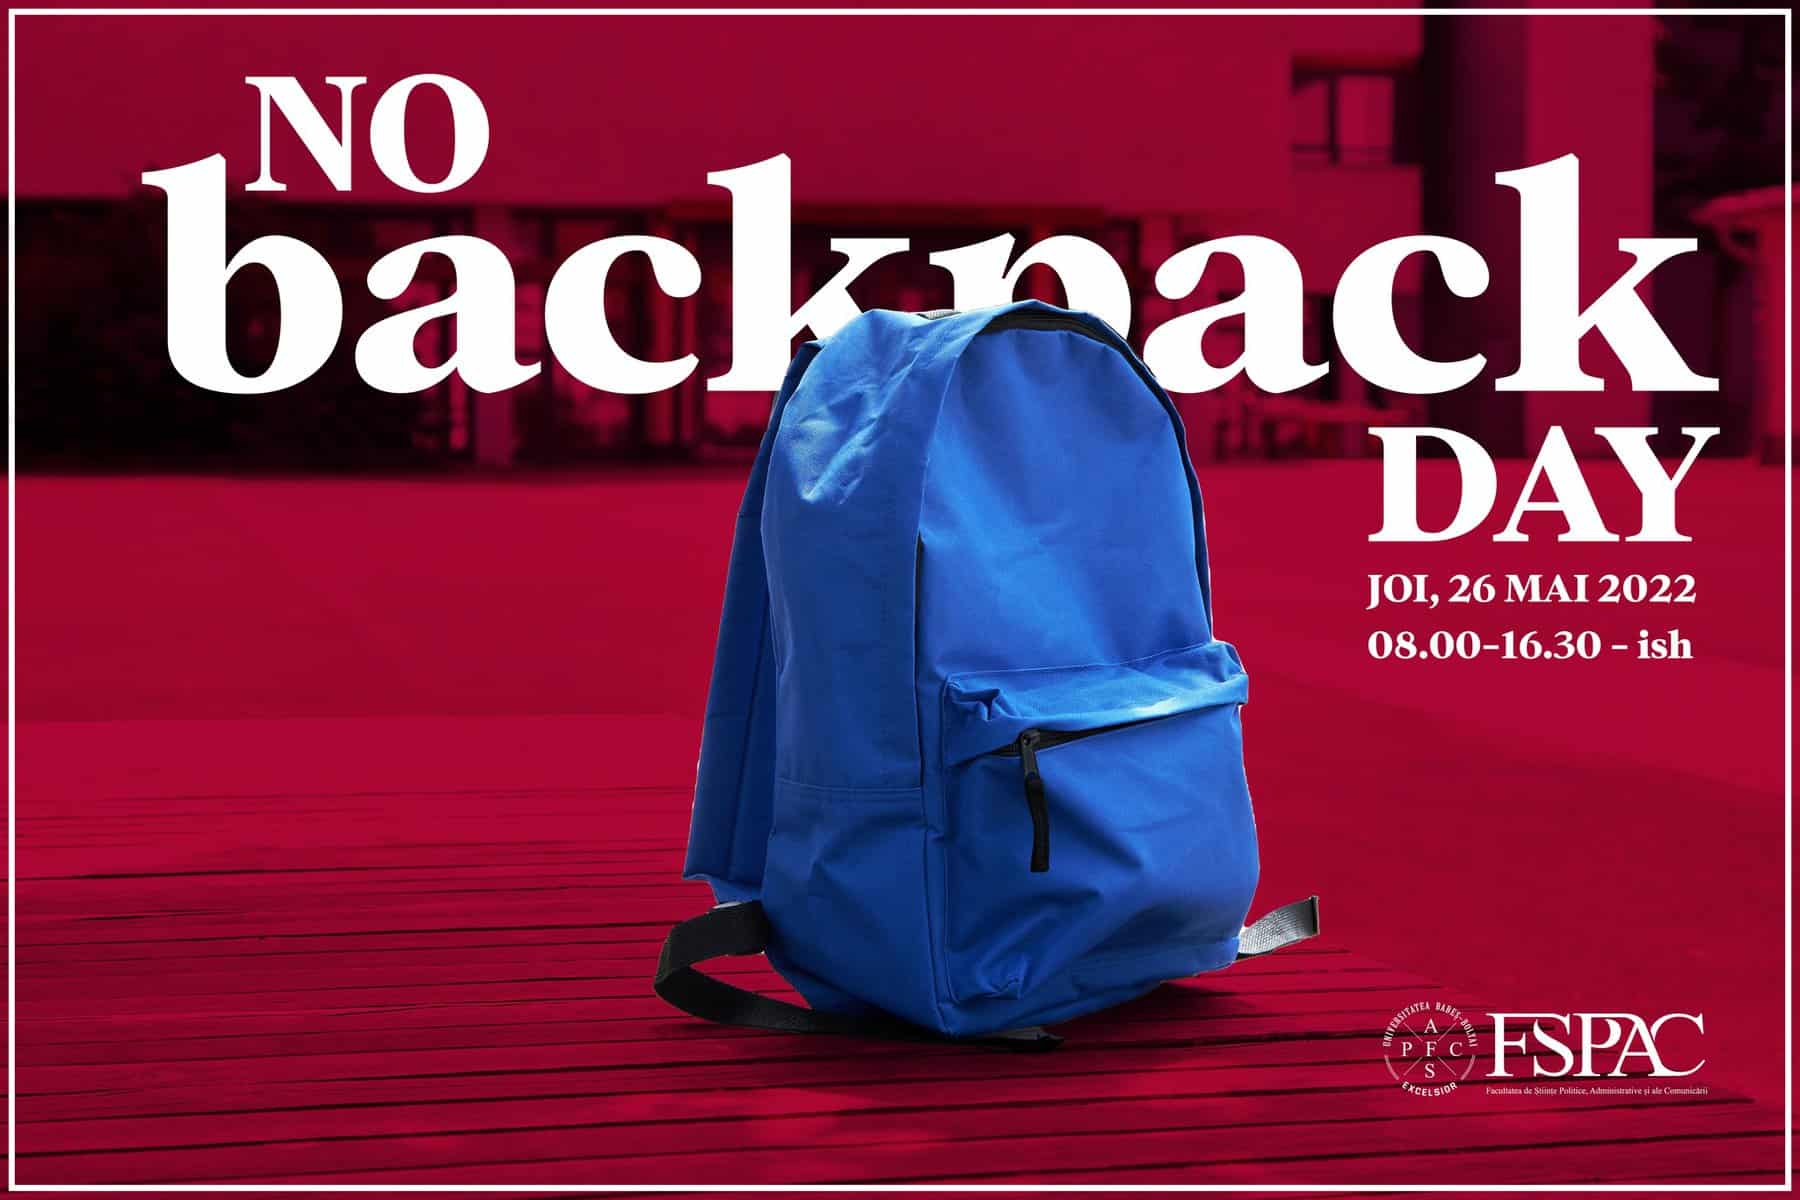 May be an image of text that says 'NO backrack back DAY JOI, 26 MAI 2022 08.00-16.30 -ish FSPAC'